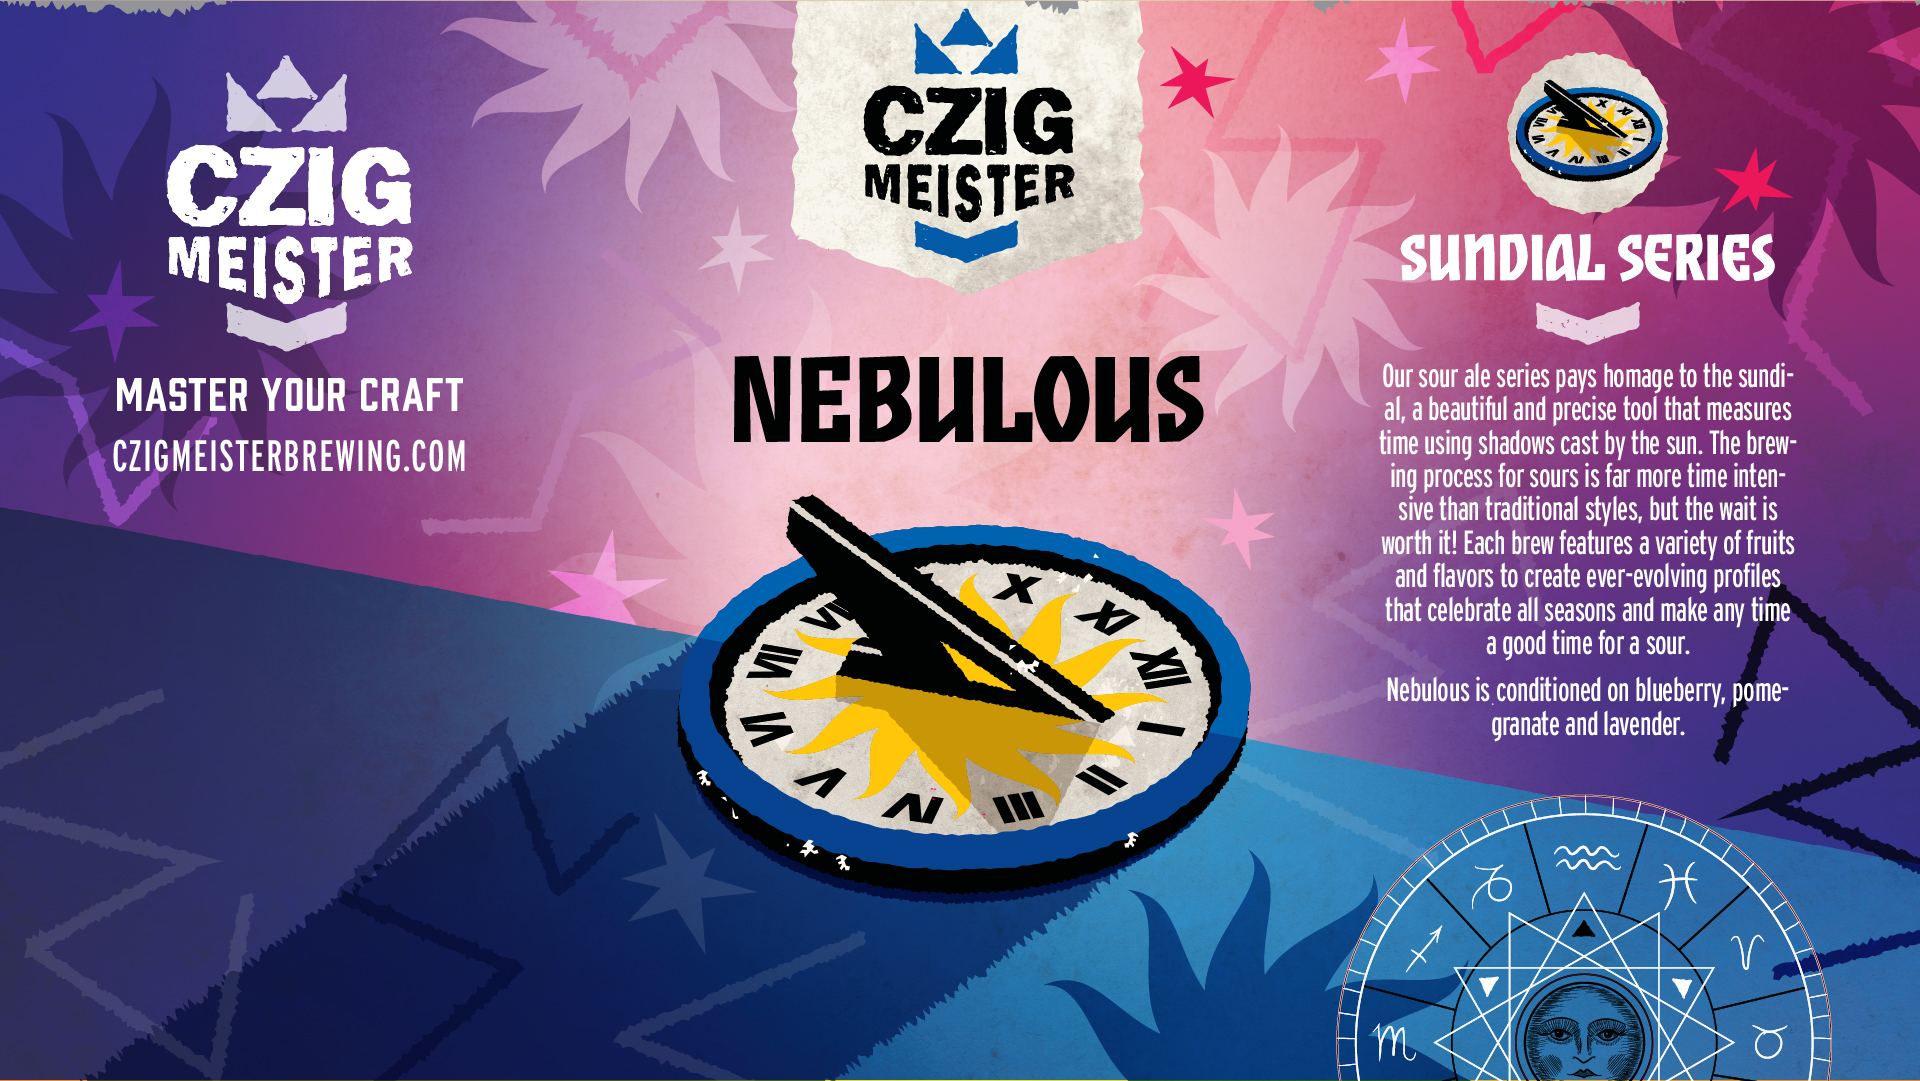 Sundial Series Nebulous from Czig Meister Brewing Company releasing September 22nd